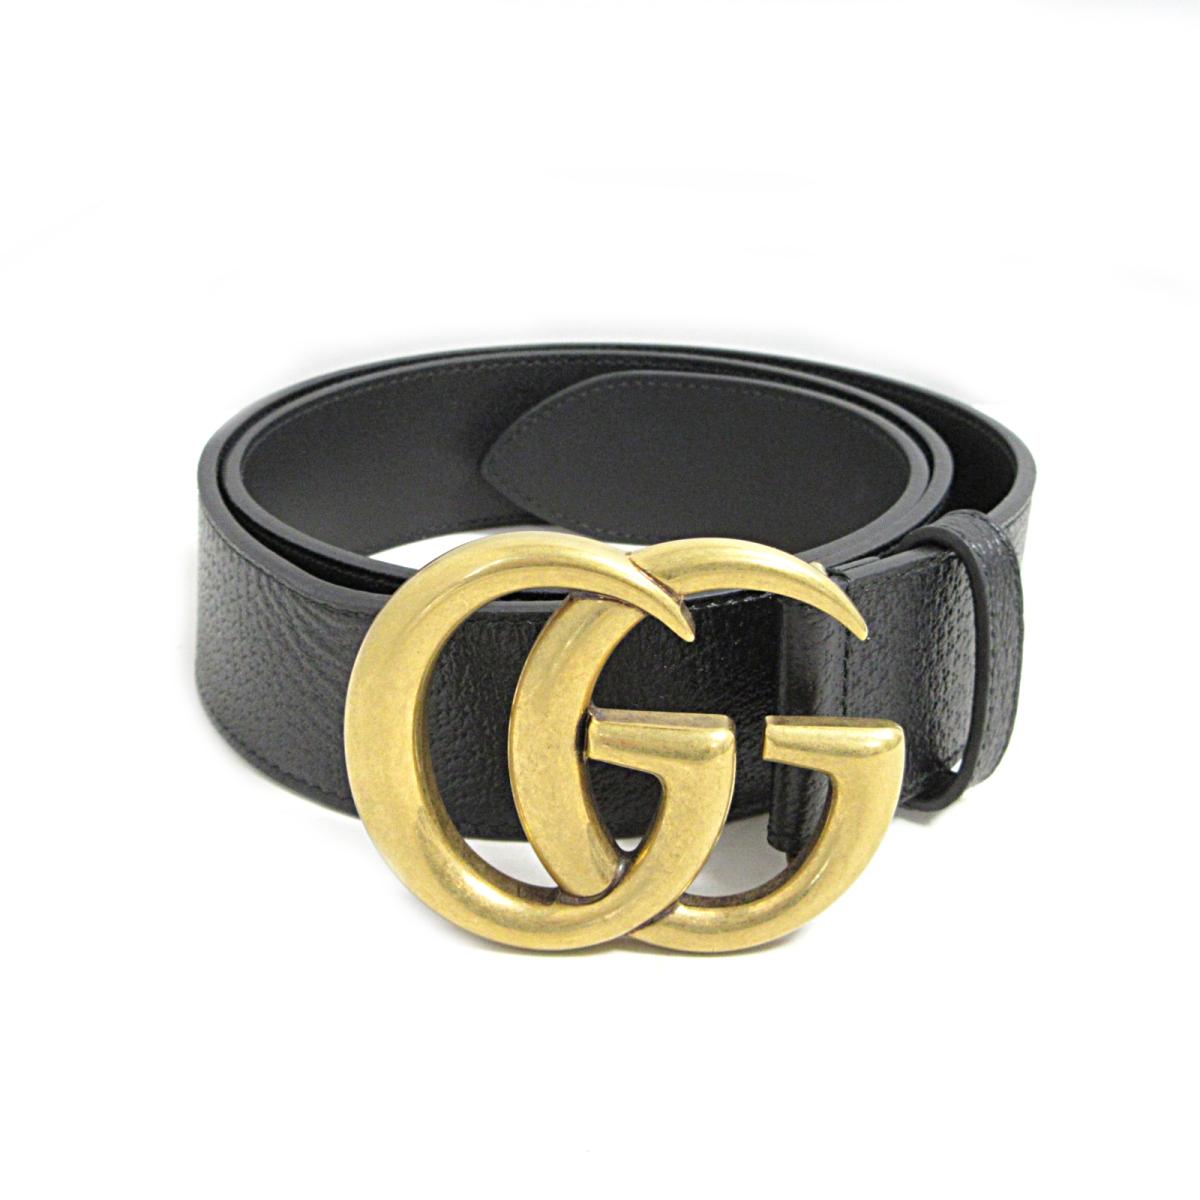 gucci mens bely